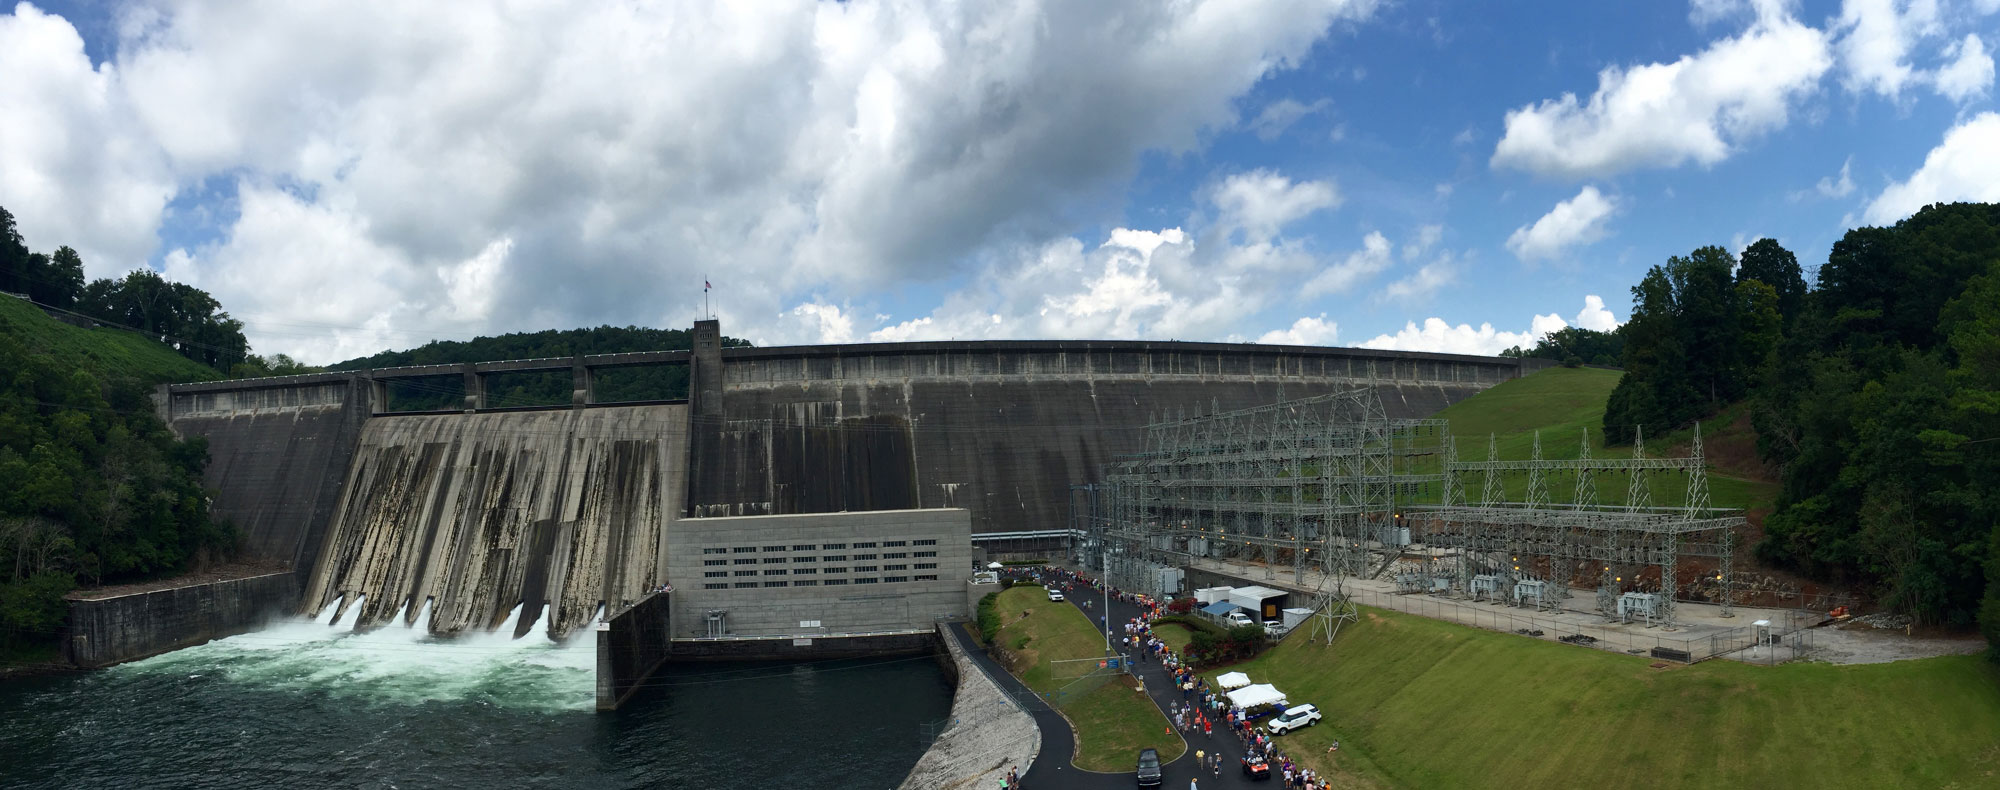 Photo of Norris Dam on the Clinch River, 2016.